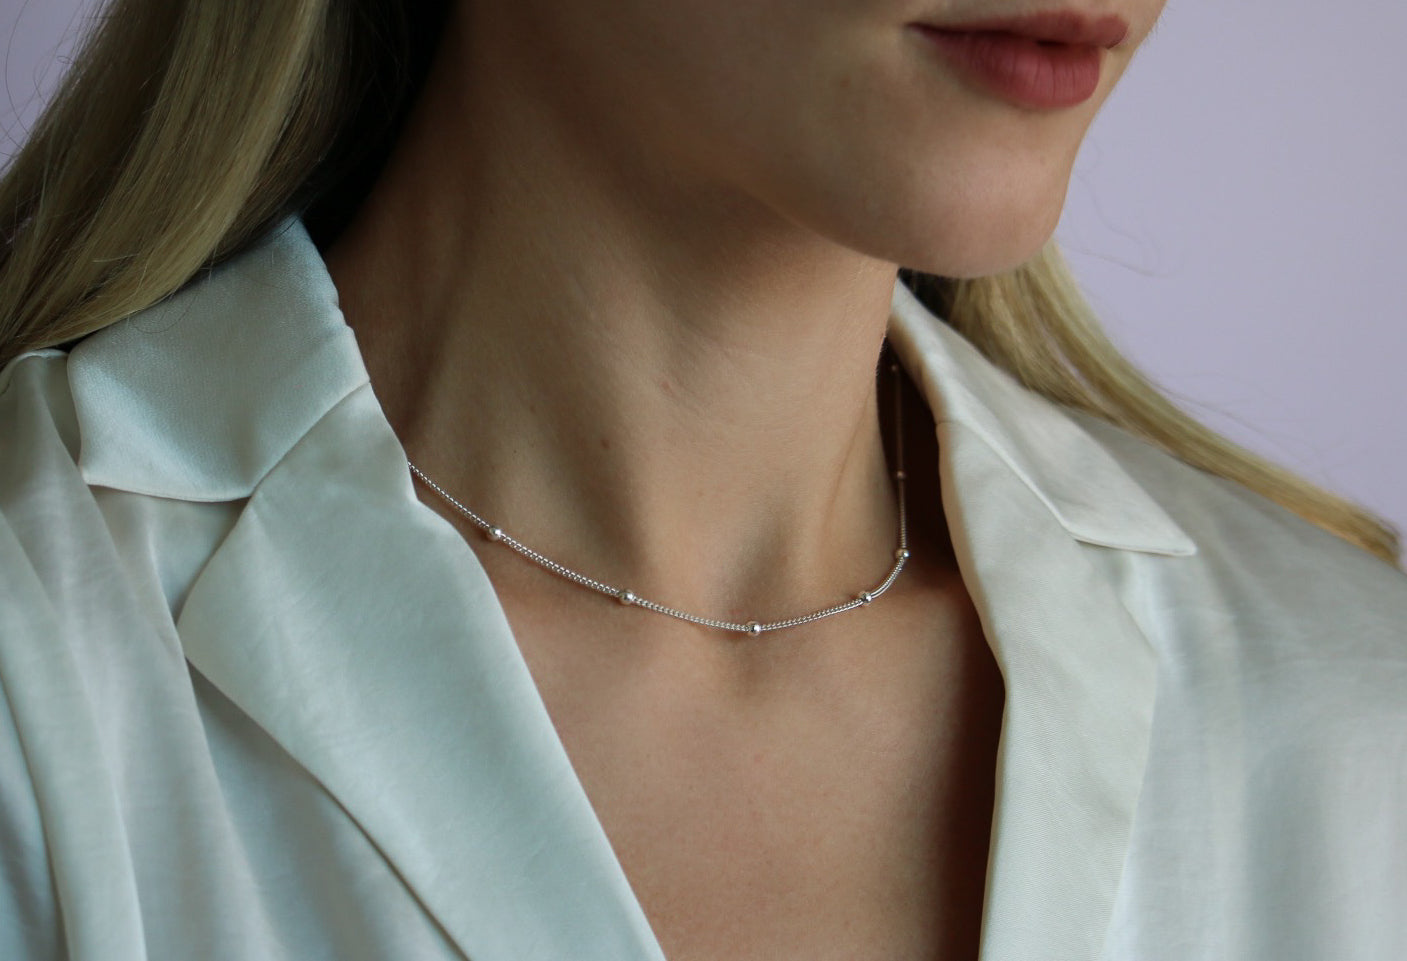 14K White Gold Bead Station Necklace